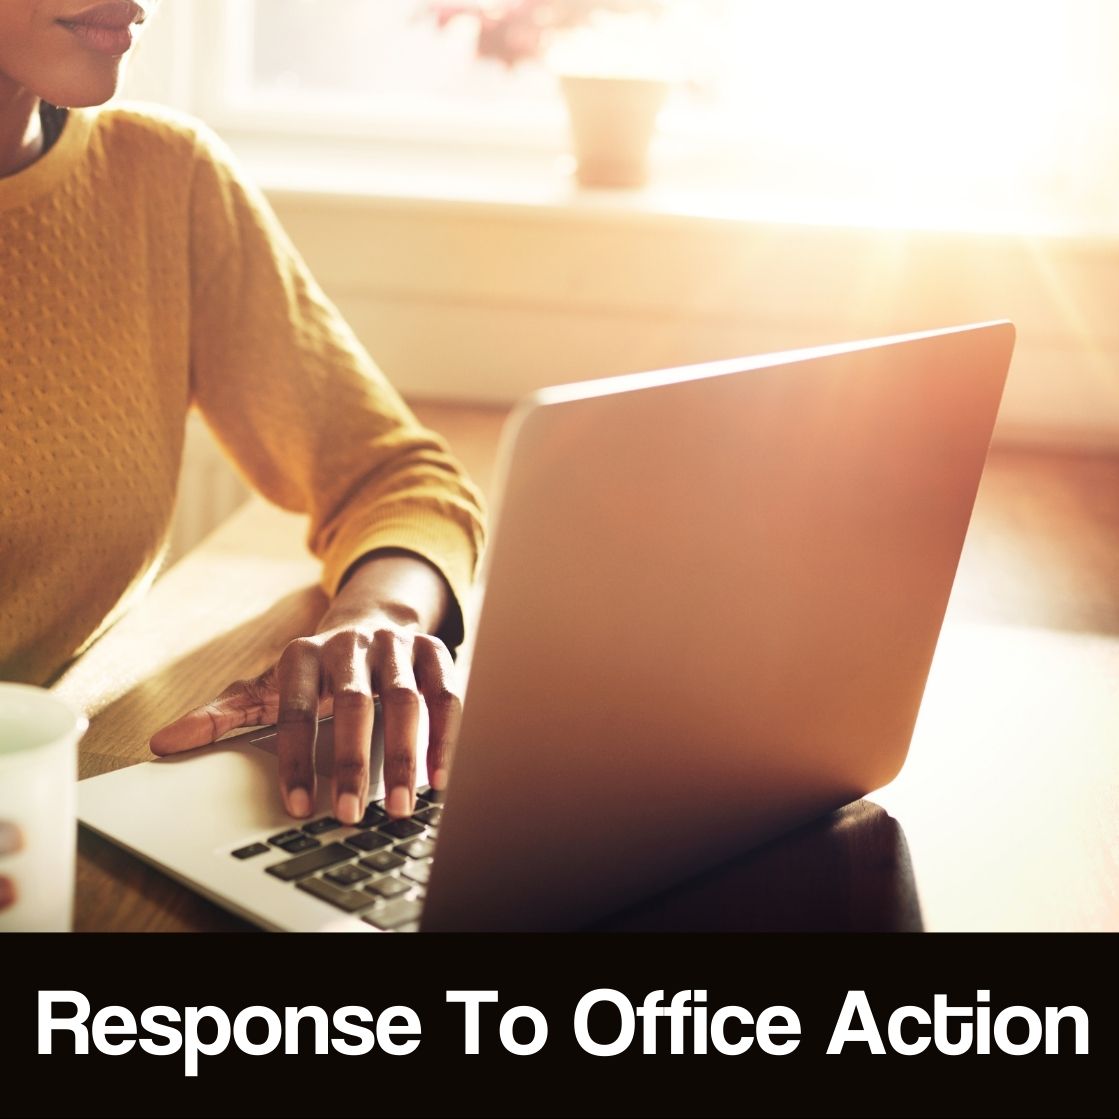 Response To Office Action